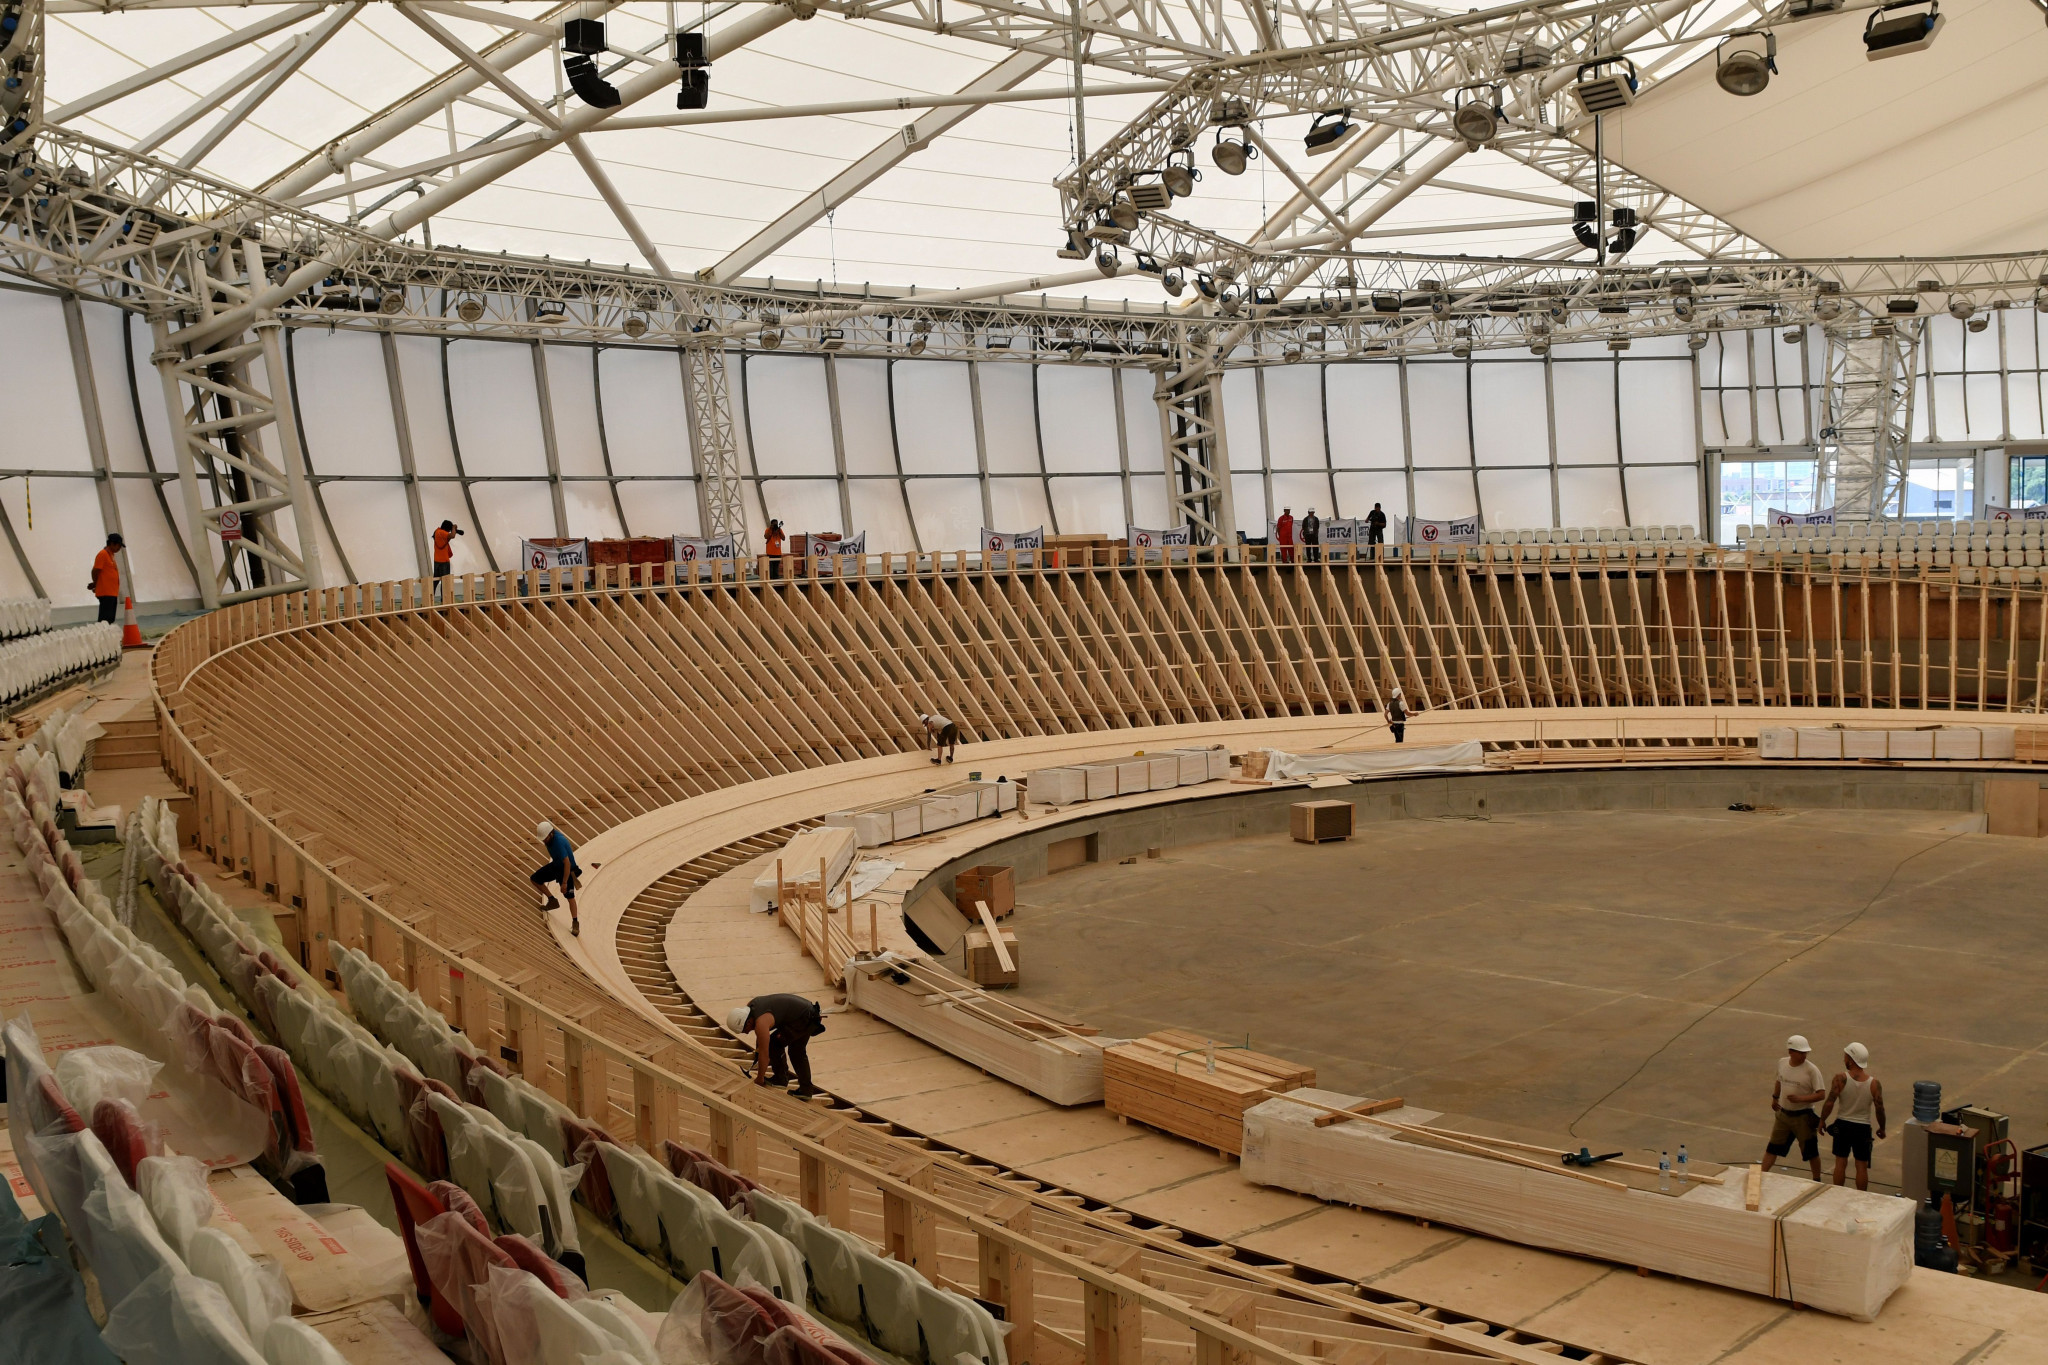 Workers build the track at the new velodrome in April ©Getty Images